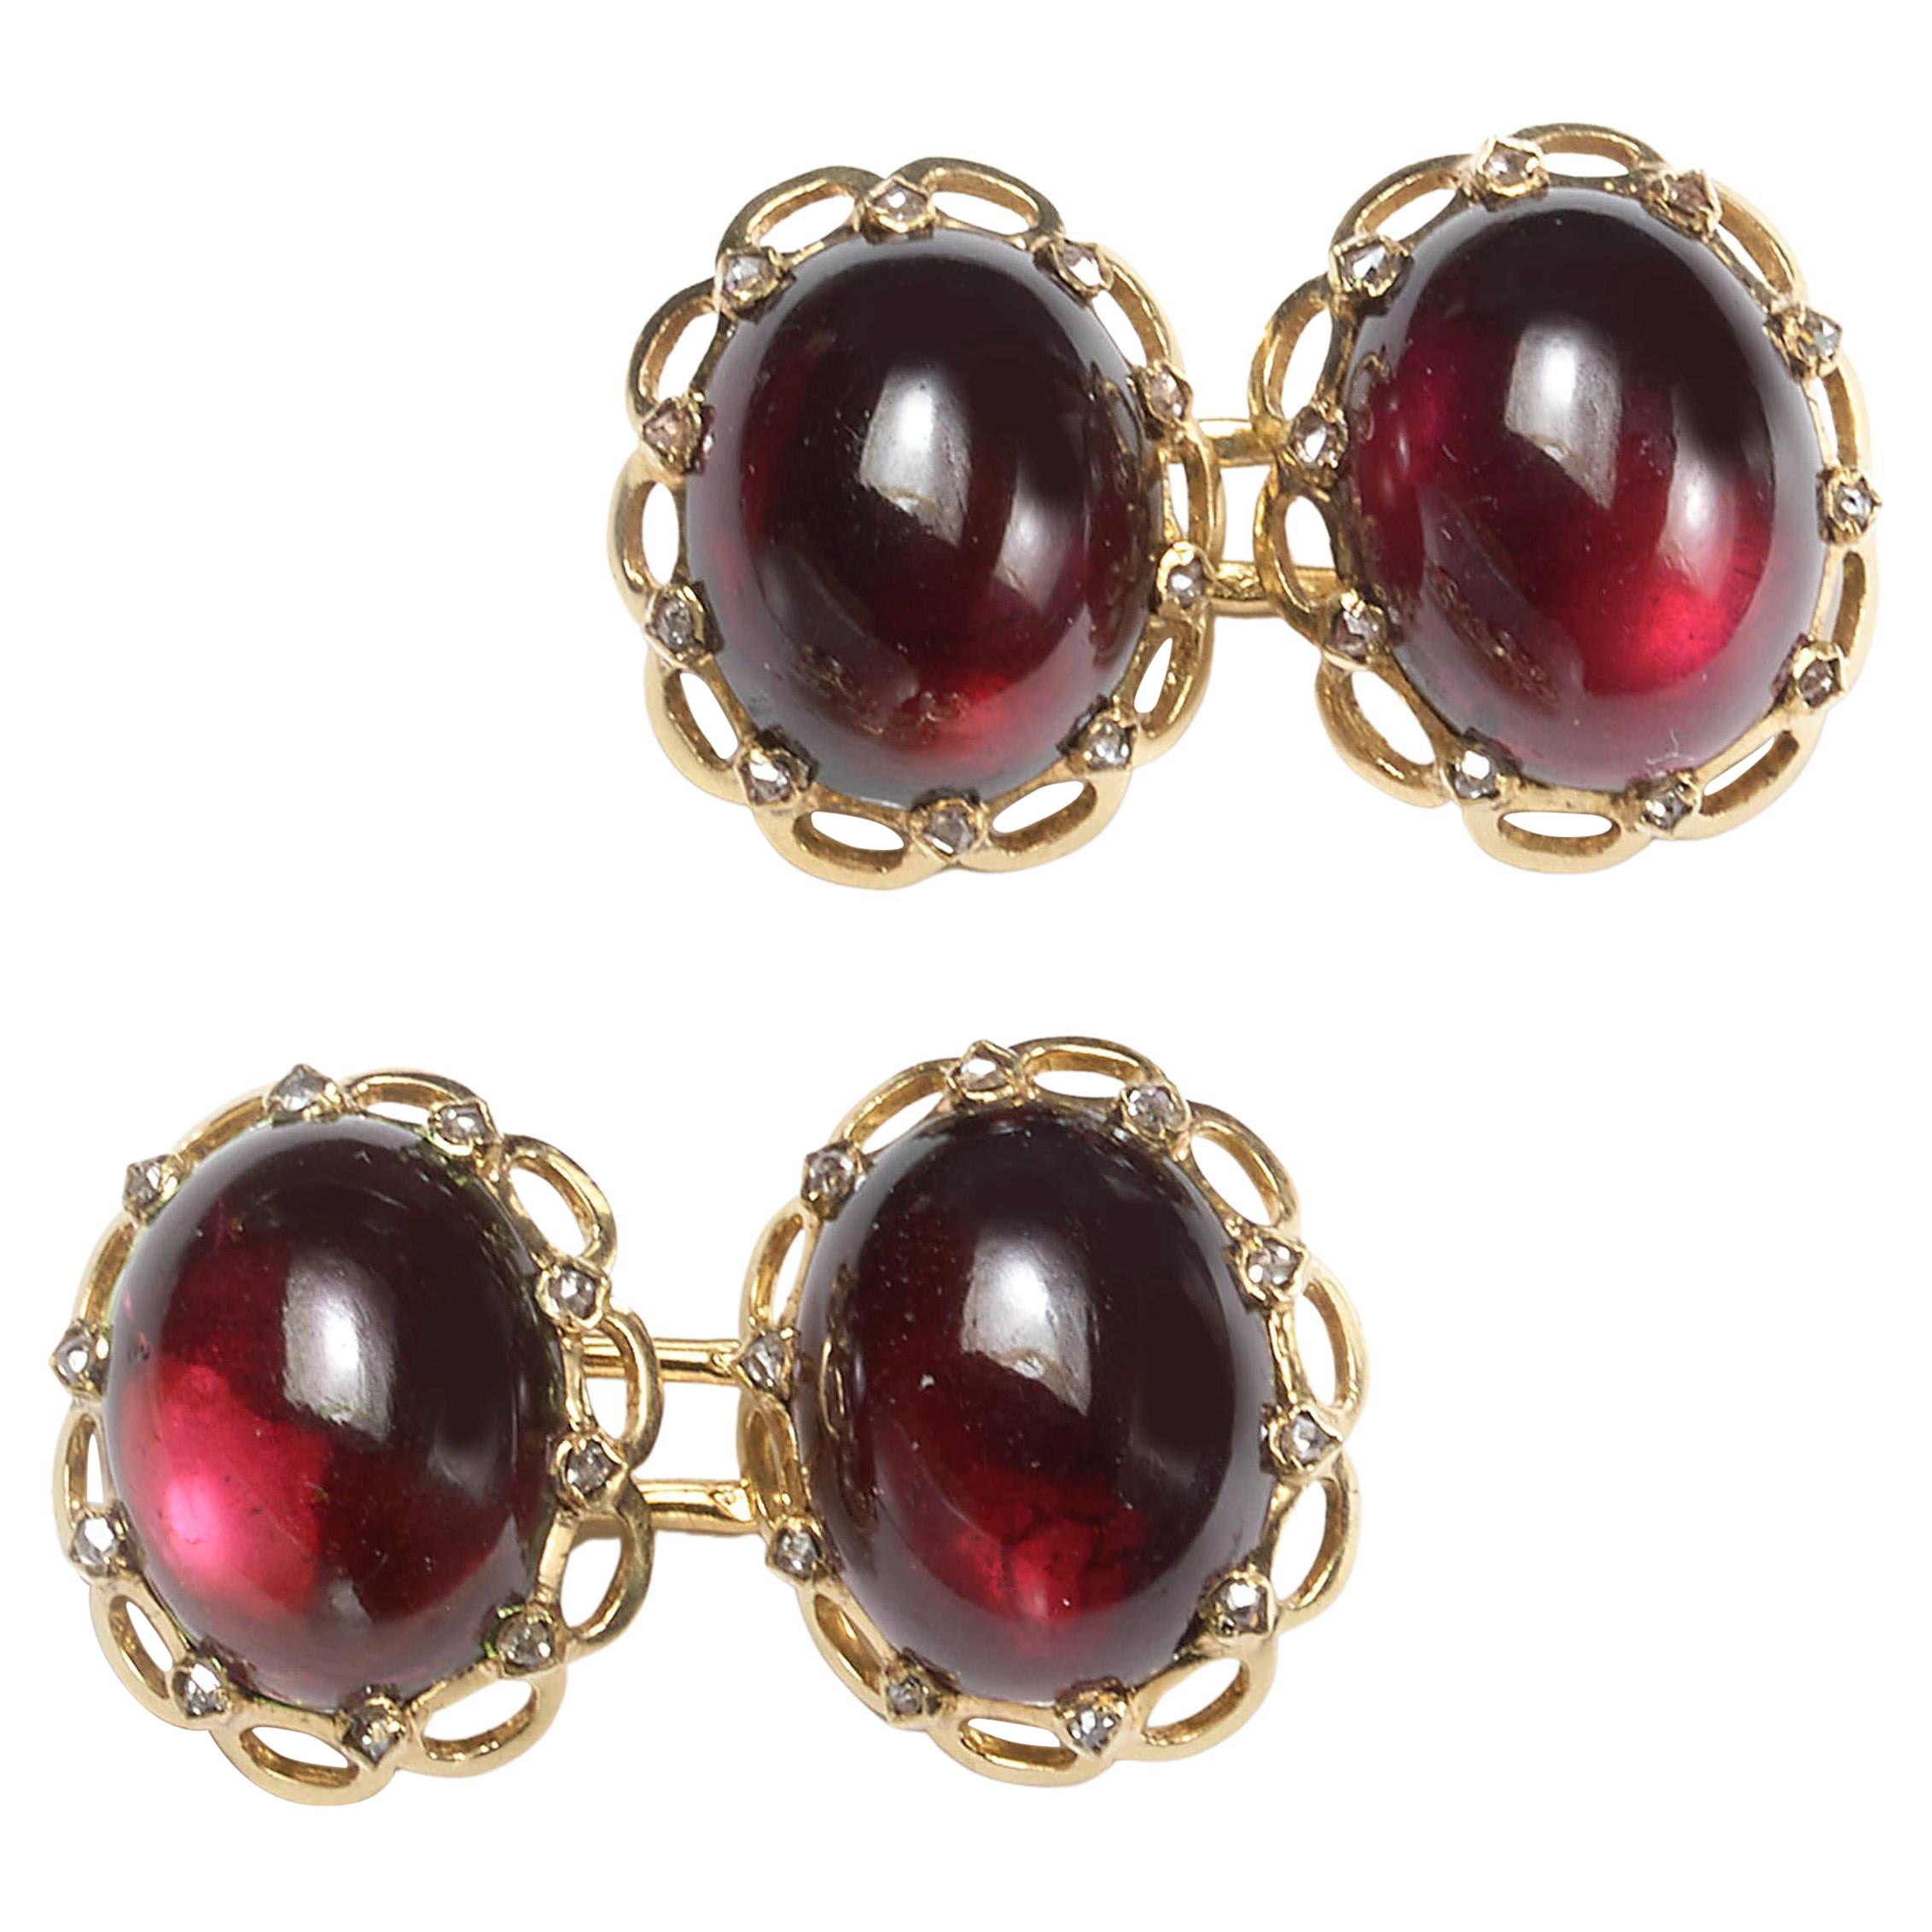 French Antique Garnet Diamond and Gold Cufflinks, Circa 1900 For Sale